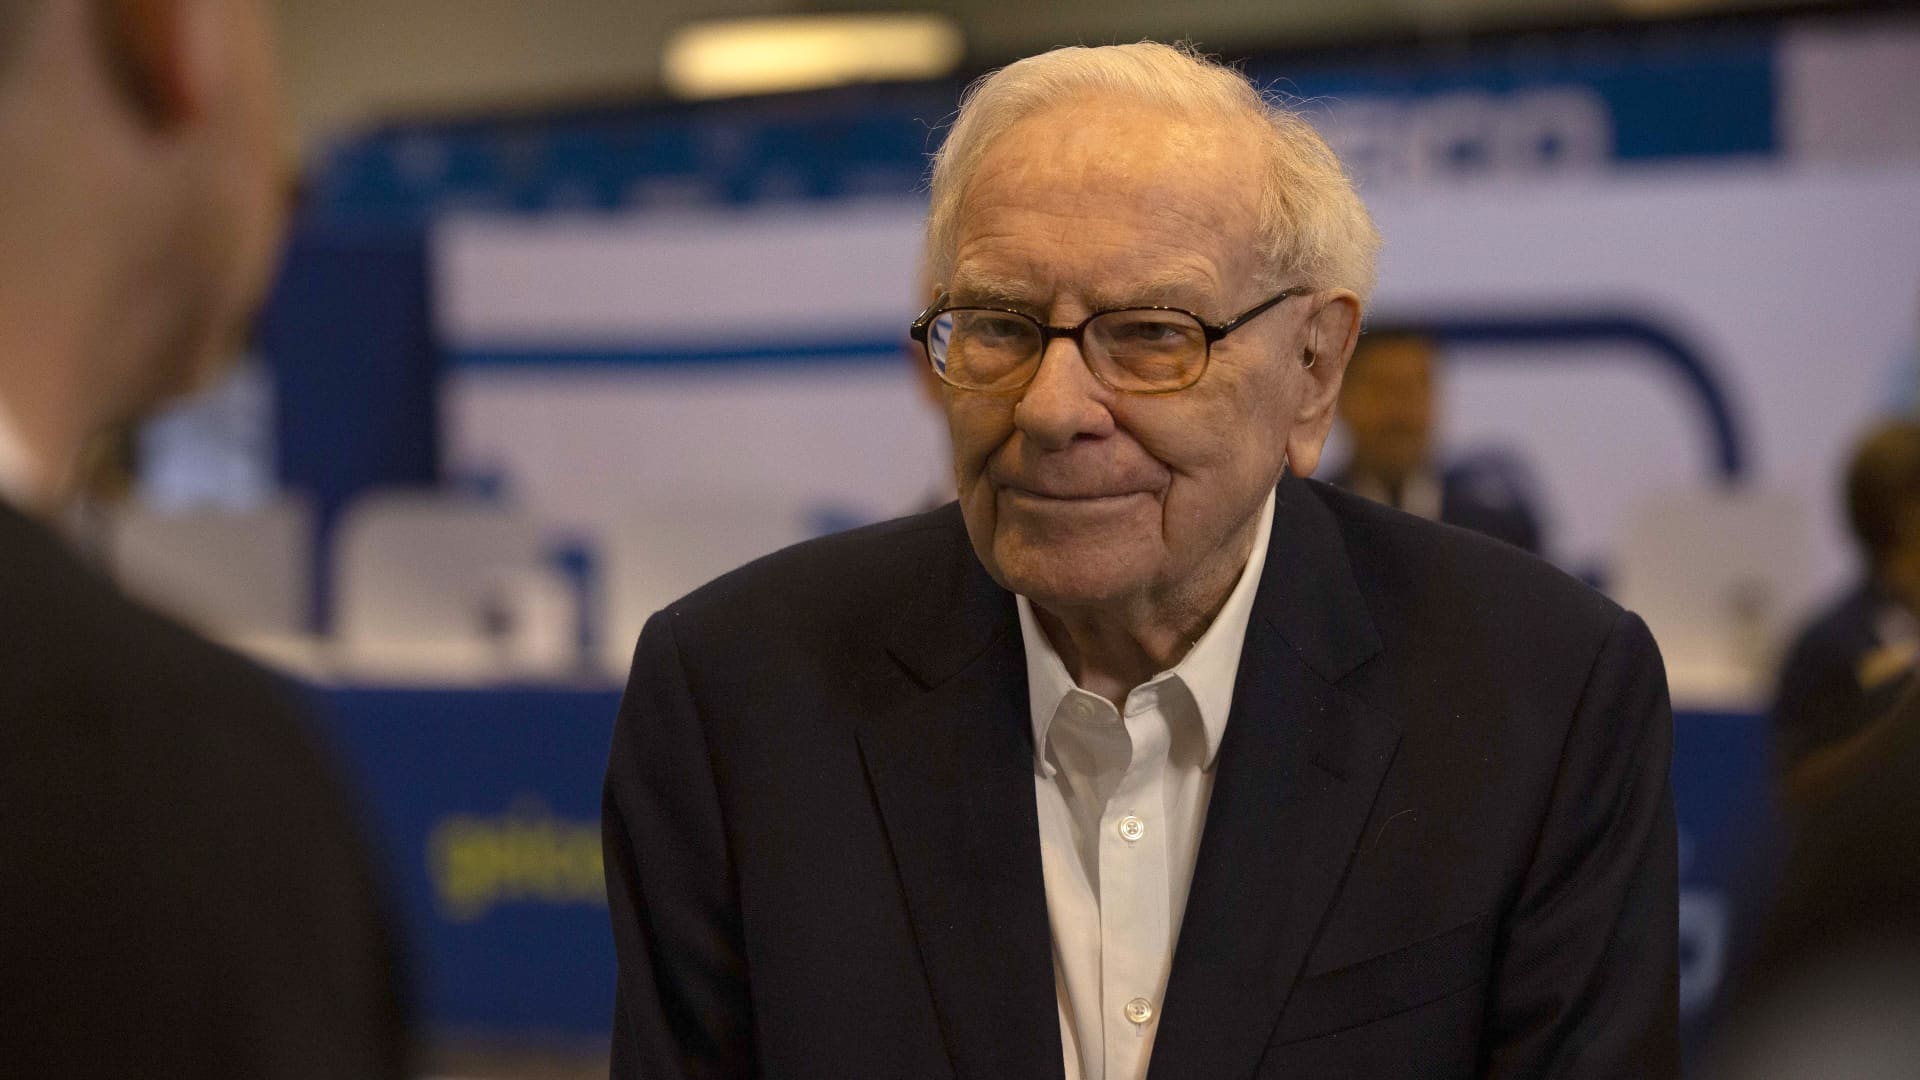 Buffett says Berkshire sold its entire Paramount stake: ‘We lost quite a bit of money’